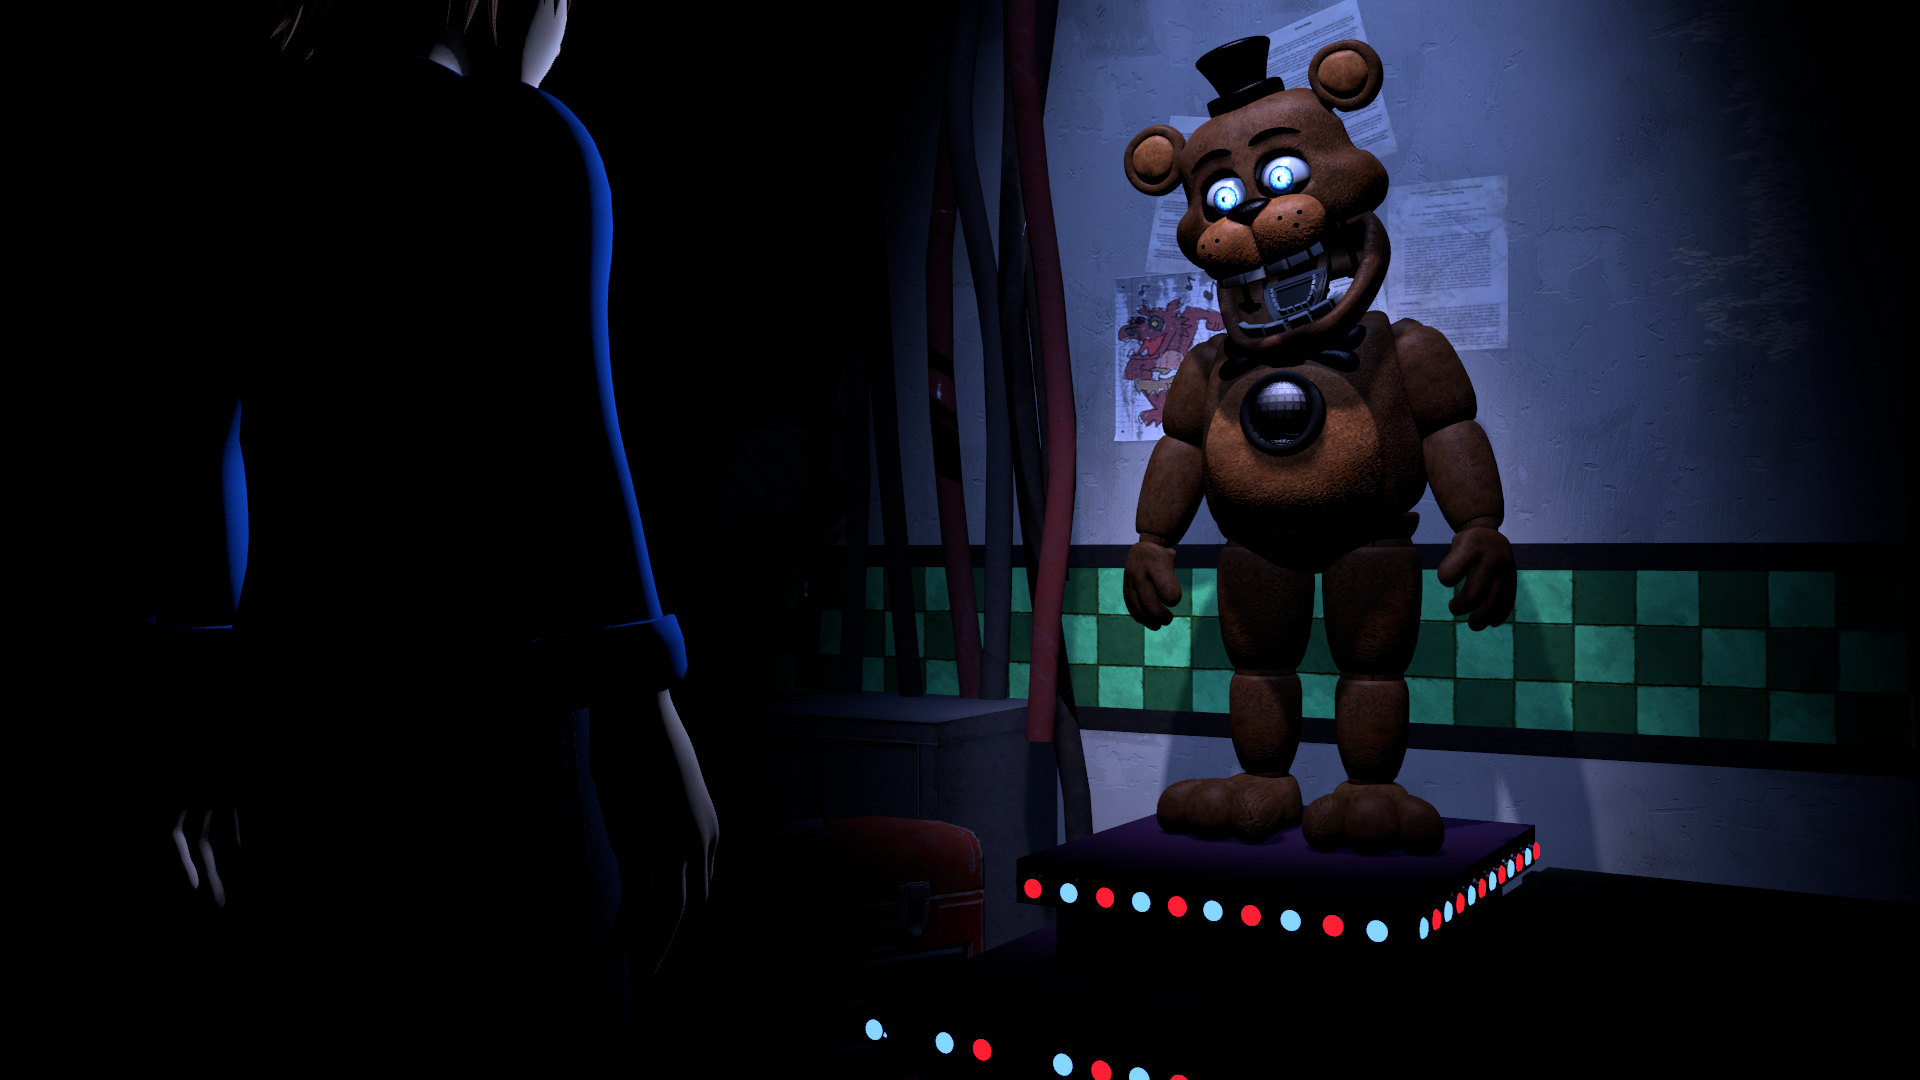 ArtStation - Lonely Freddy (animation commission for Kyle Allen Music)